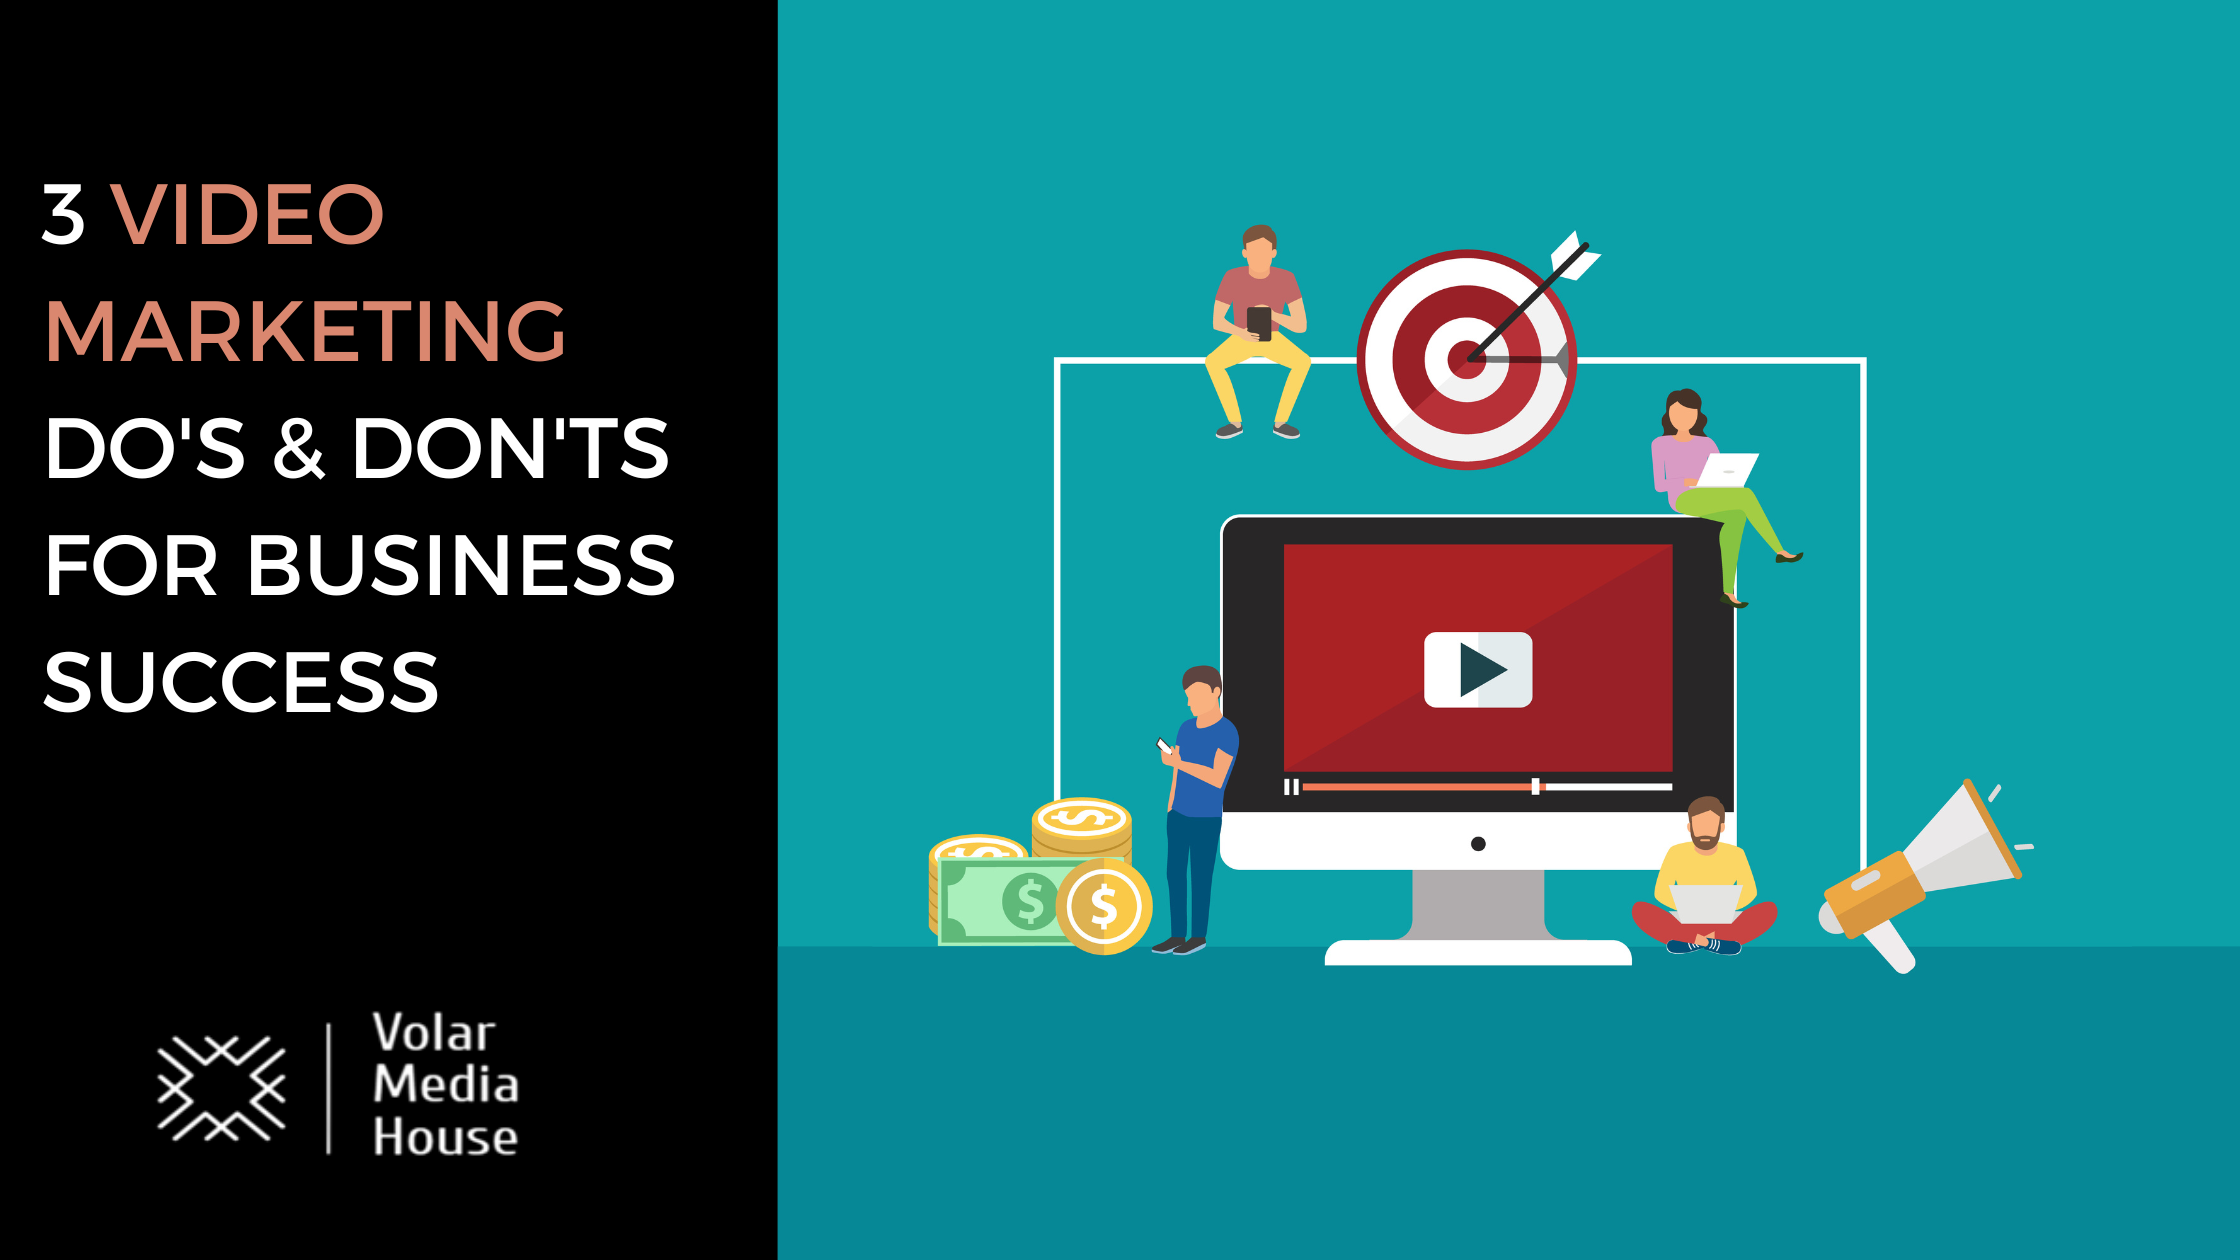 3 Video Marketing Do's & Don'ts for Business Success